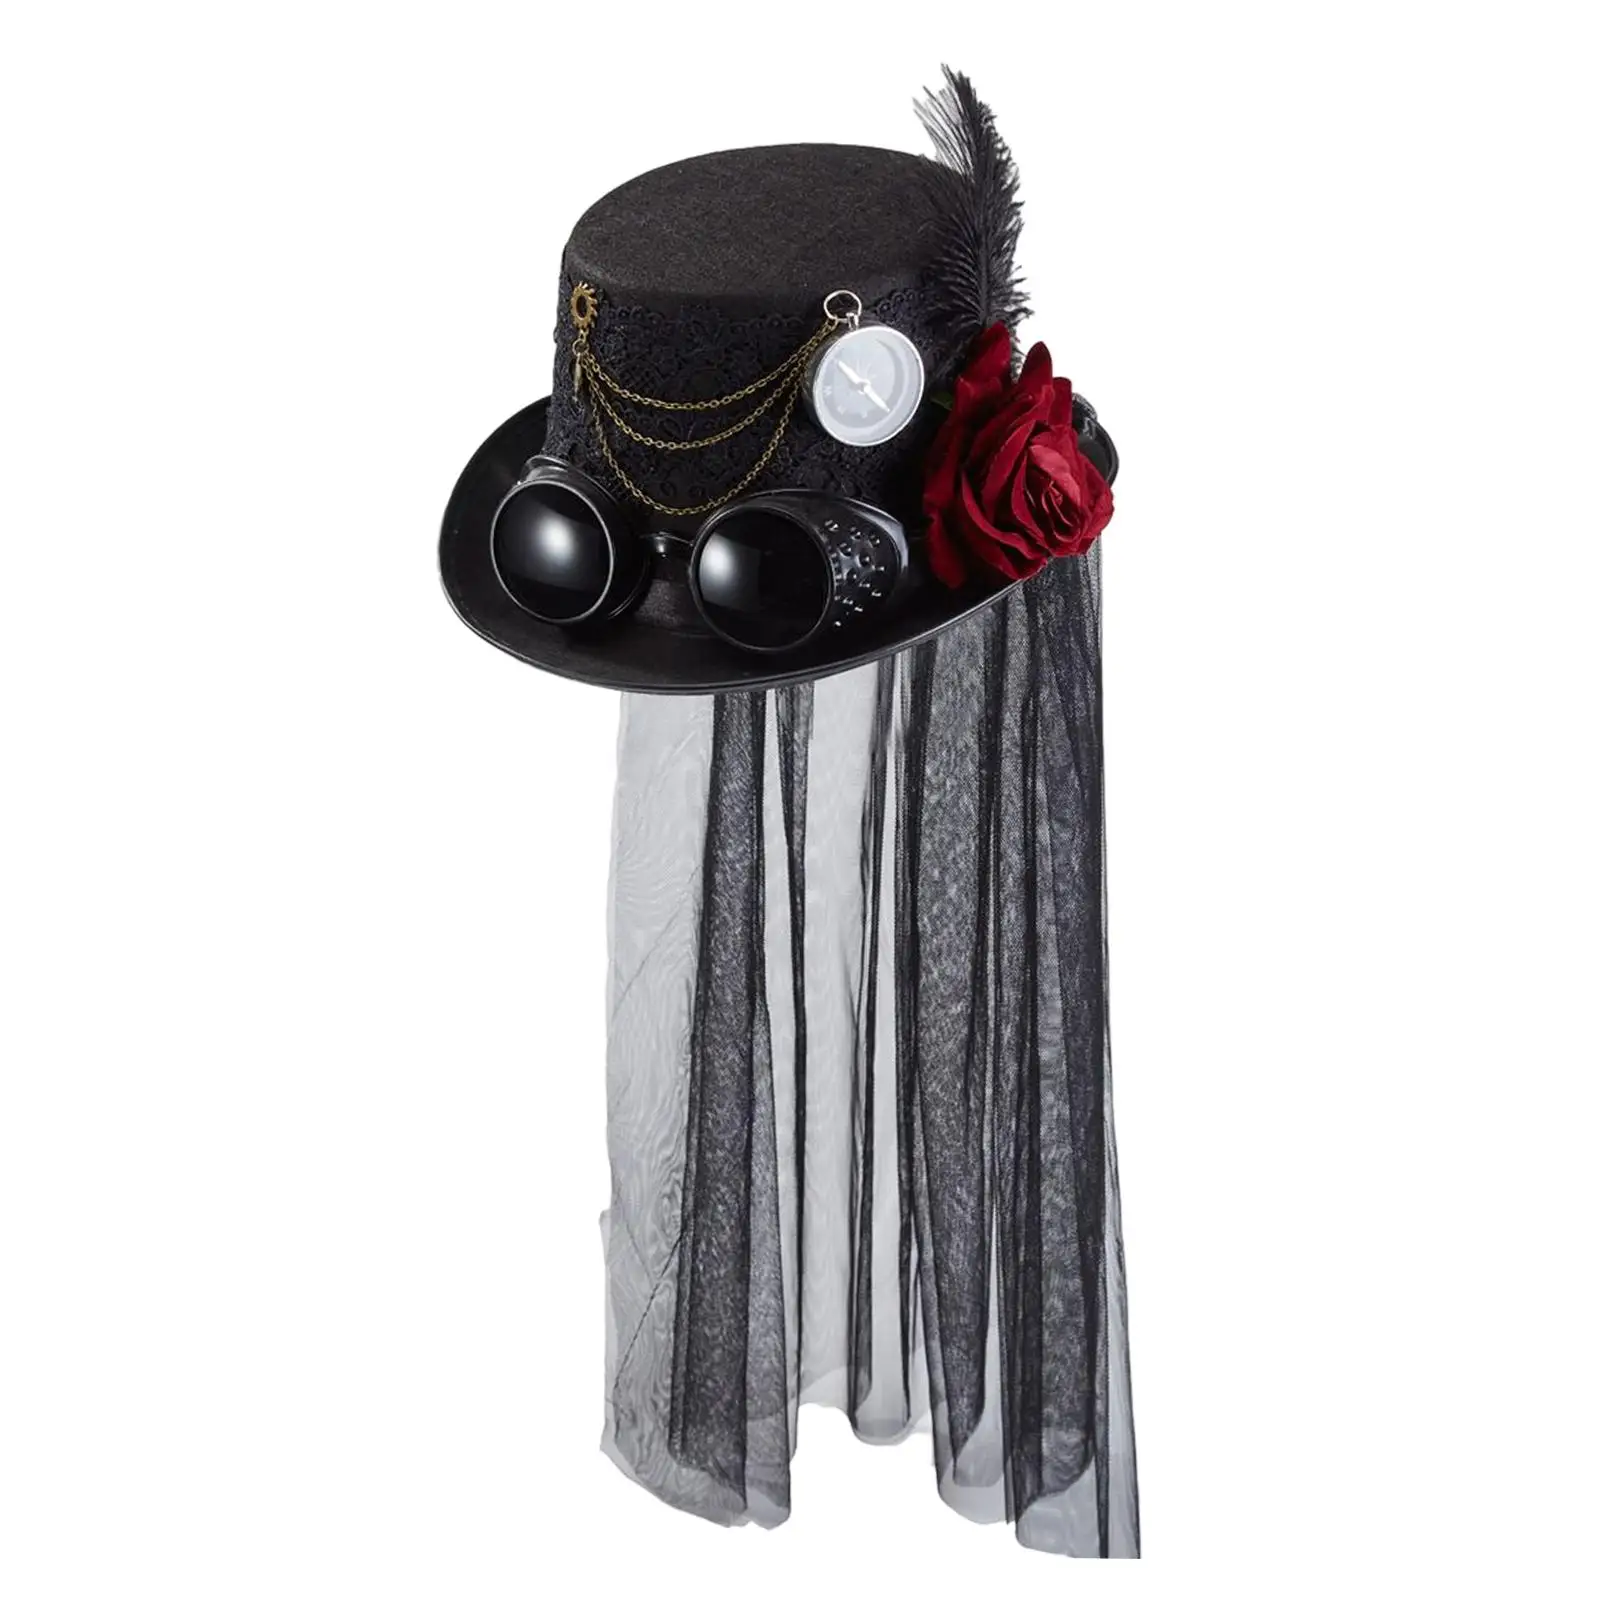 Steampunk Top Hat Gothic Vintage Head Gear Flower Feather Decorative with Goggles Headband Headwear Fedoras for Supplies Adult